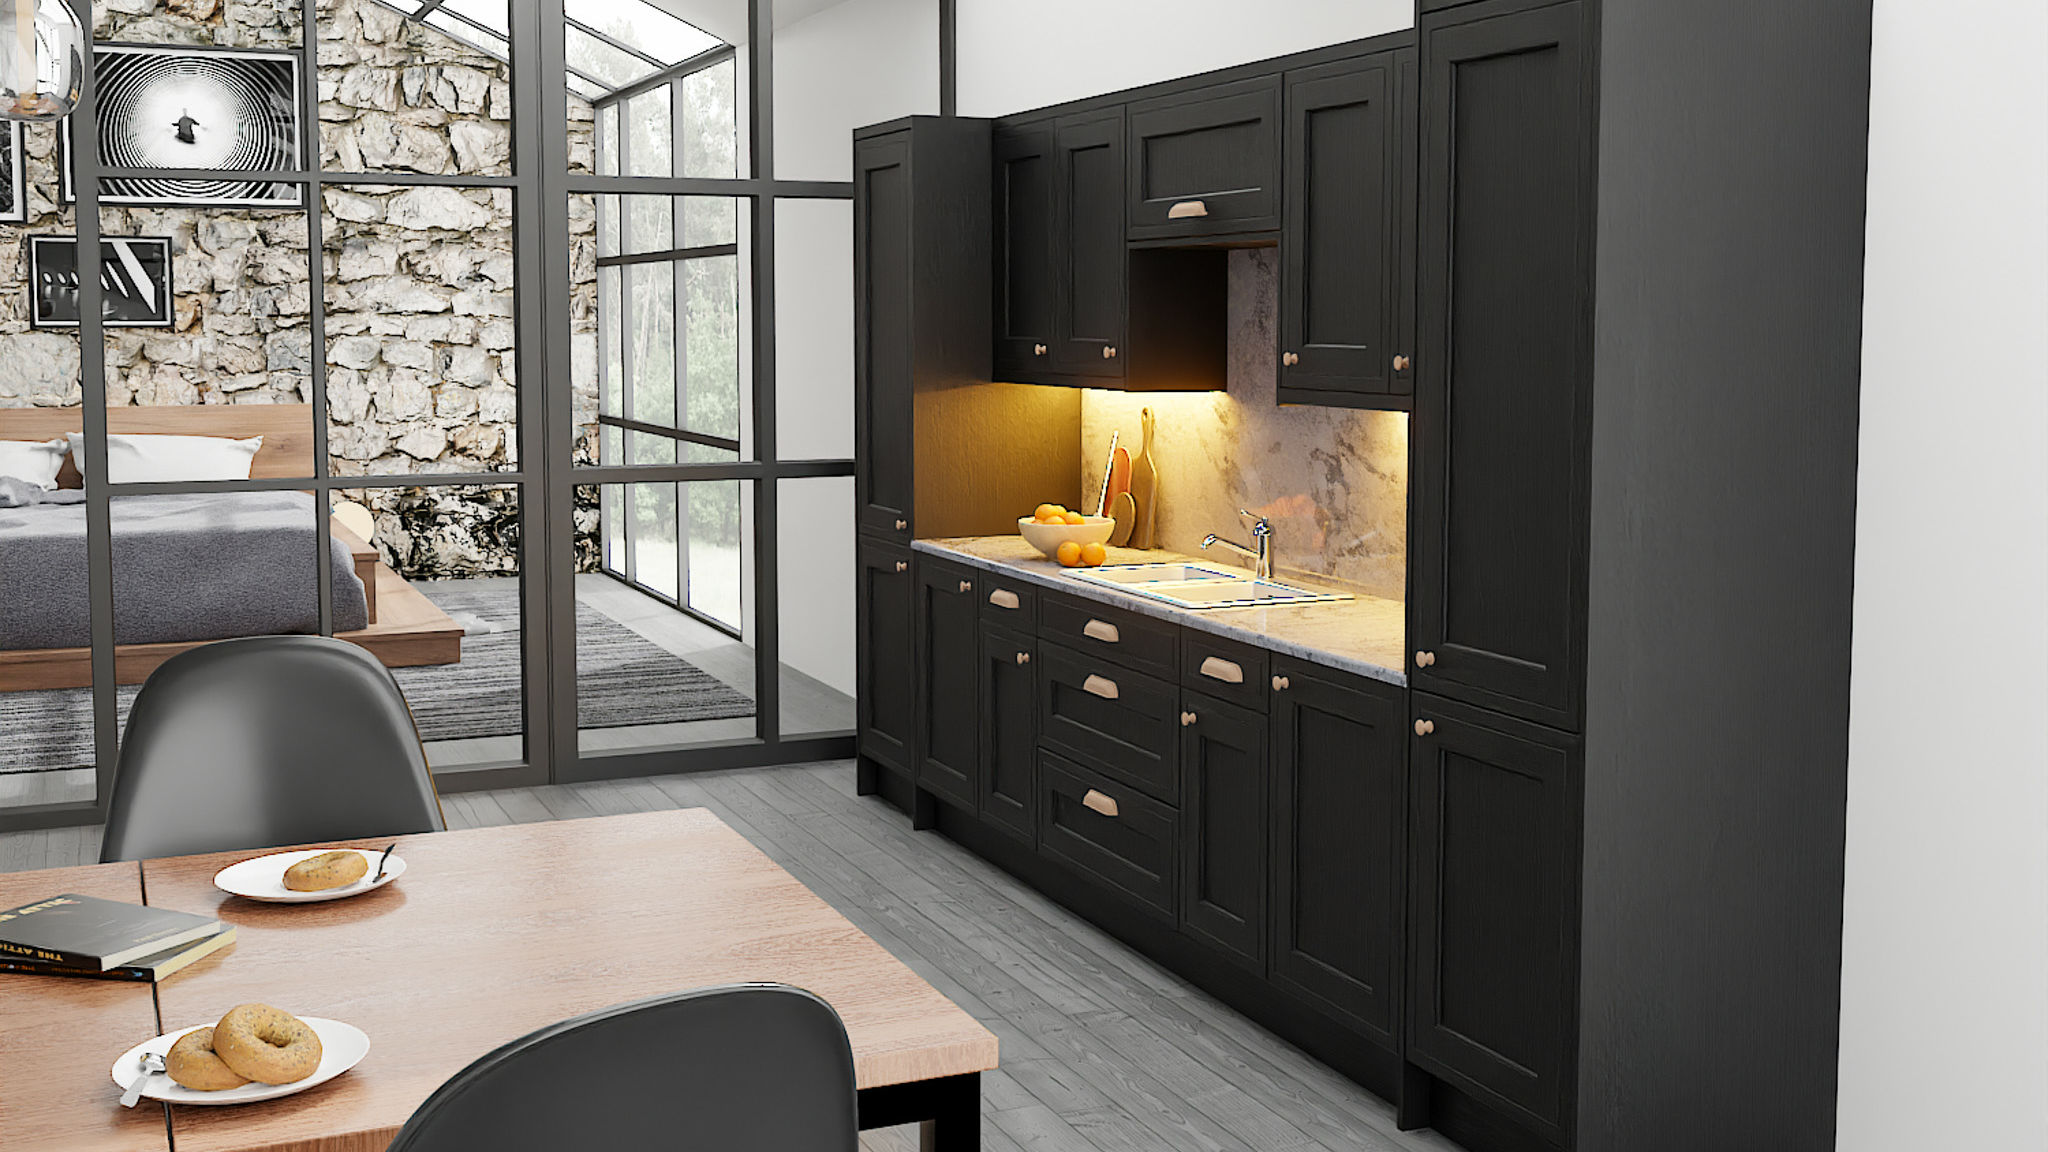 Mock inframe Winslow Cannon Black kitchens featuring a bespoke appearance with deep black hues